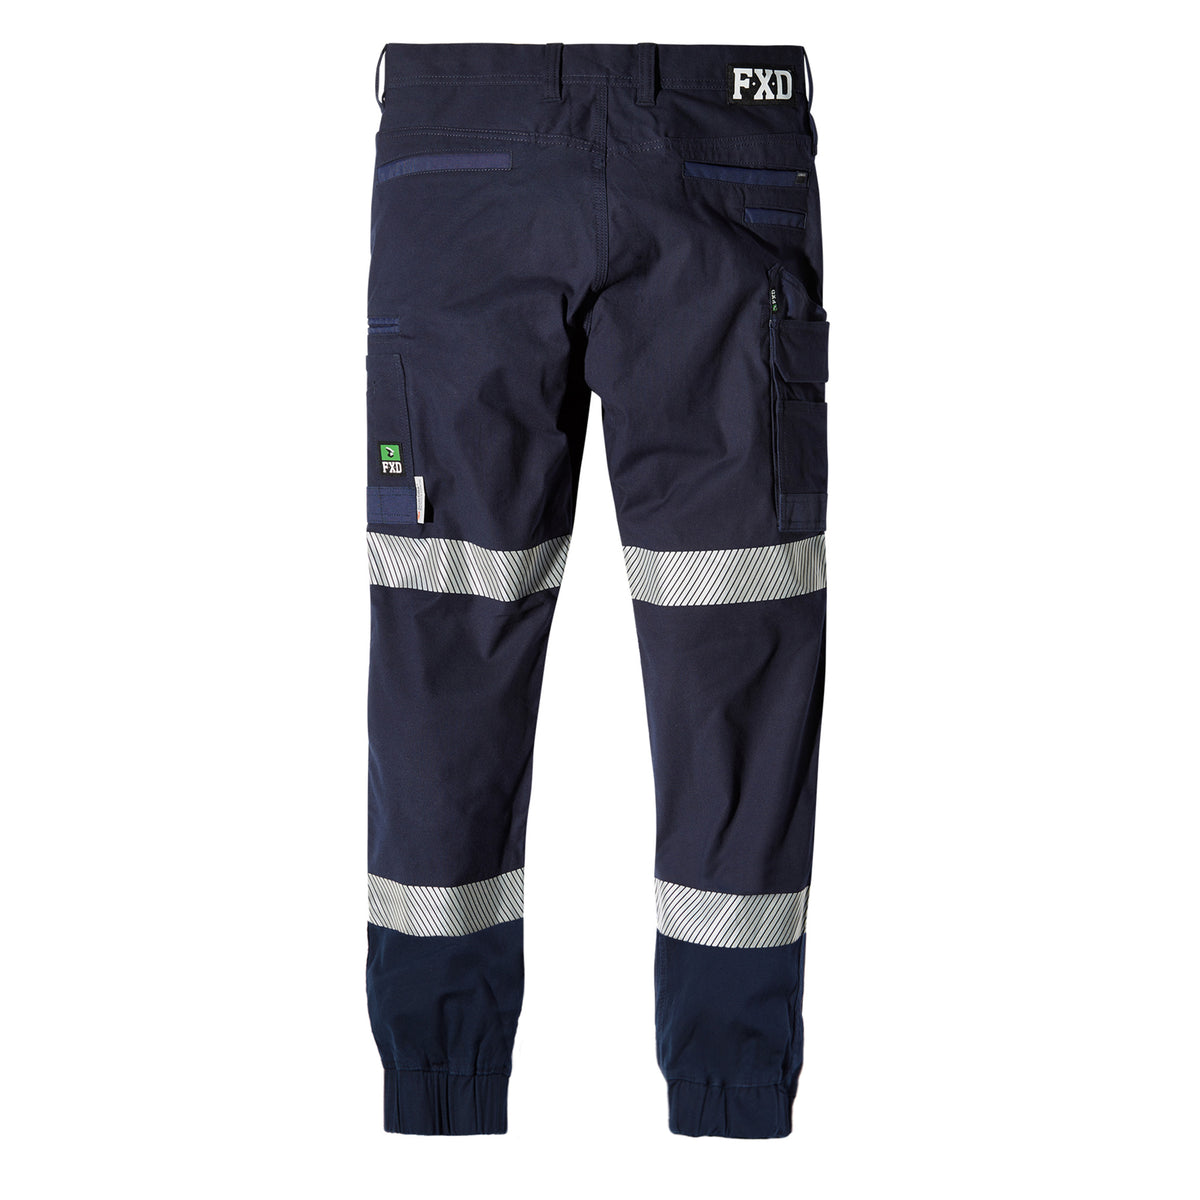 fxd reflective cuffed work pants in navy